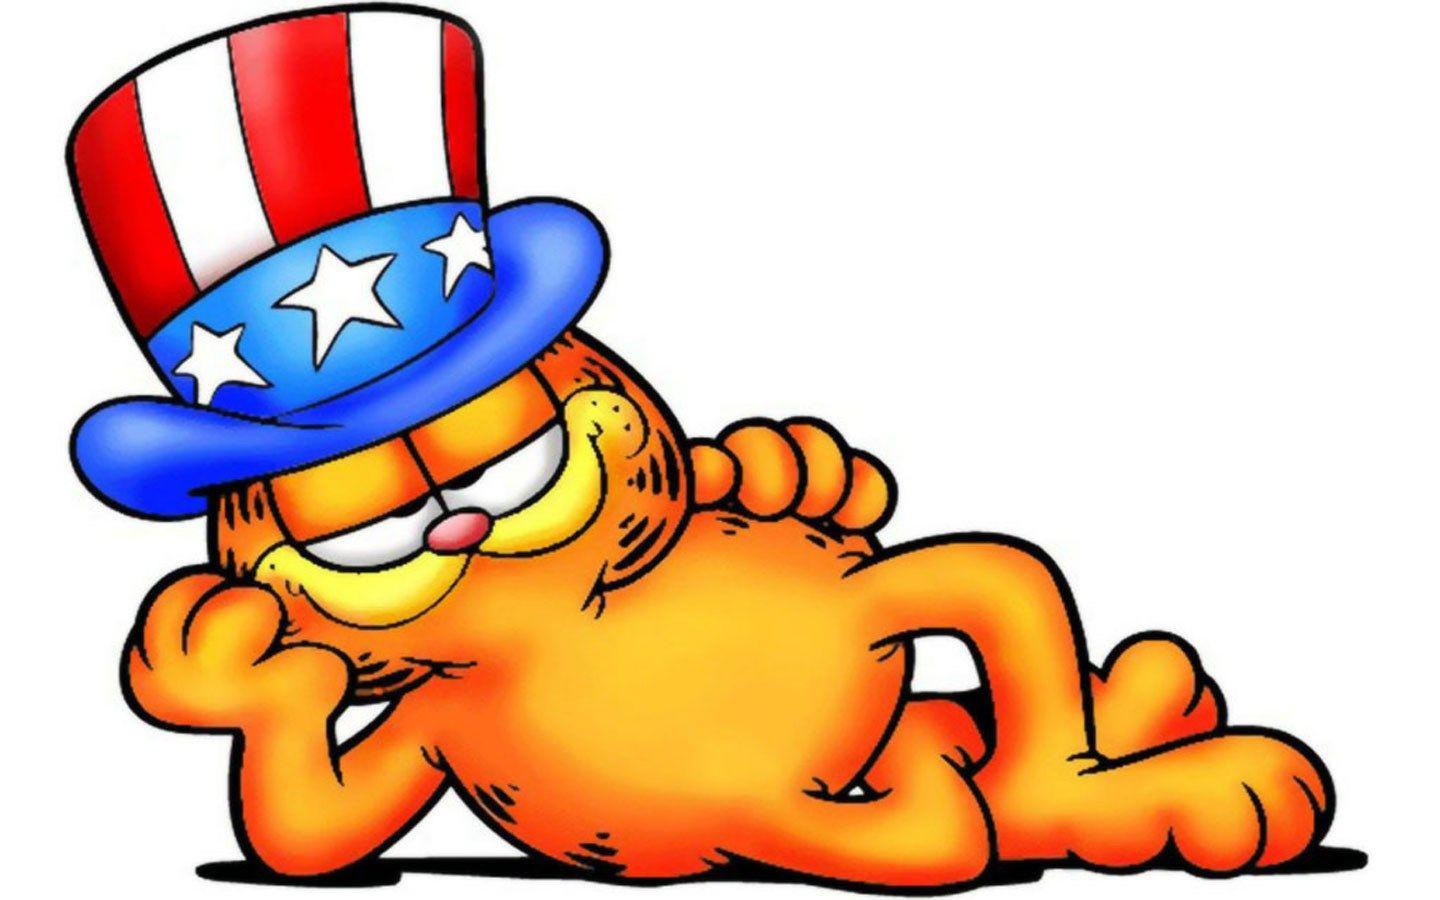 garfield cat wallpapers and backgrounds.